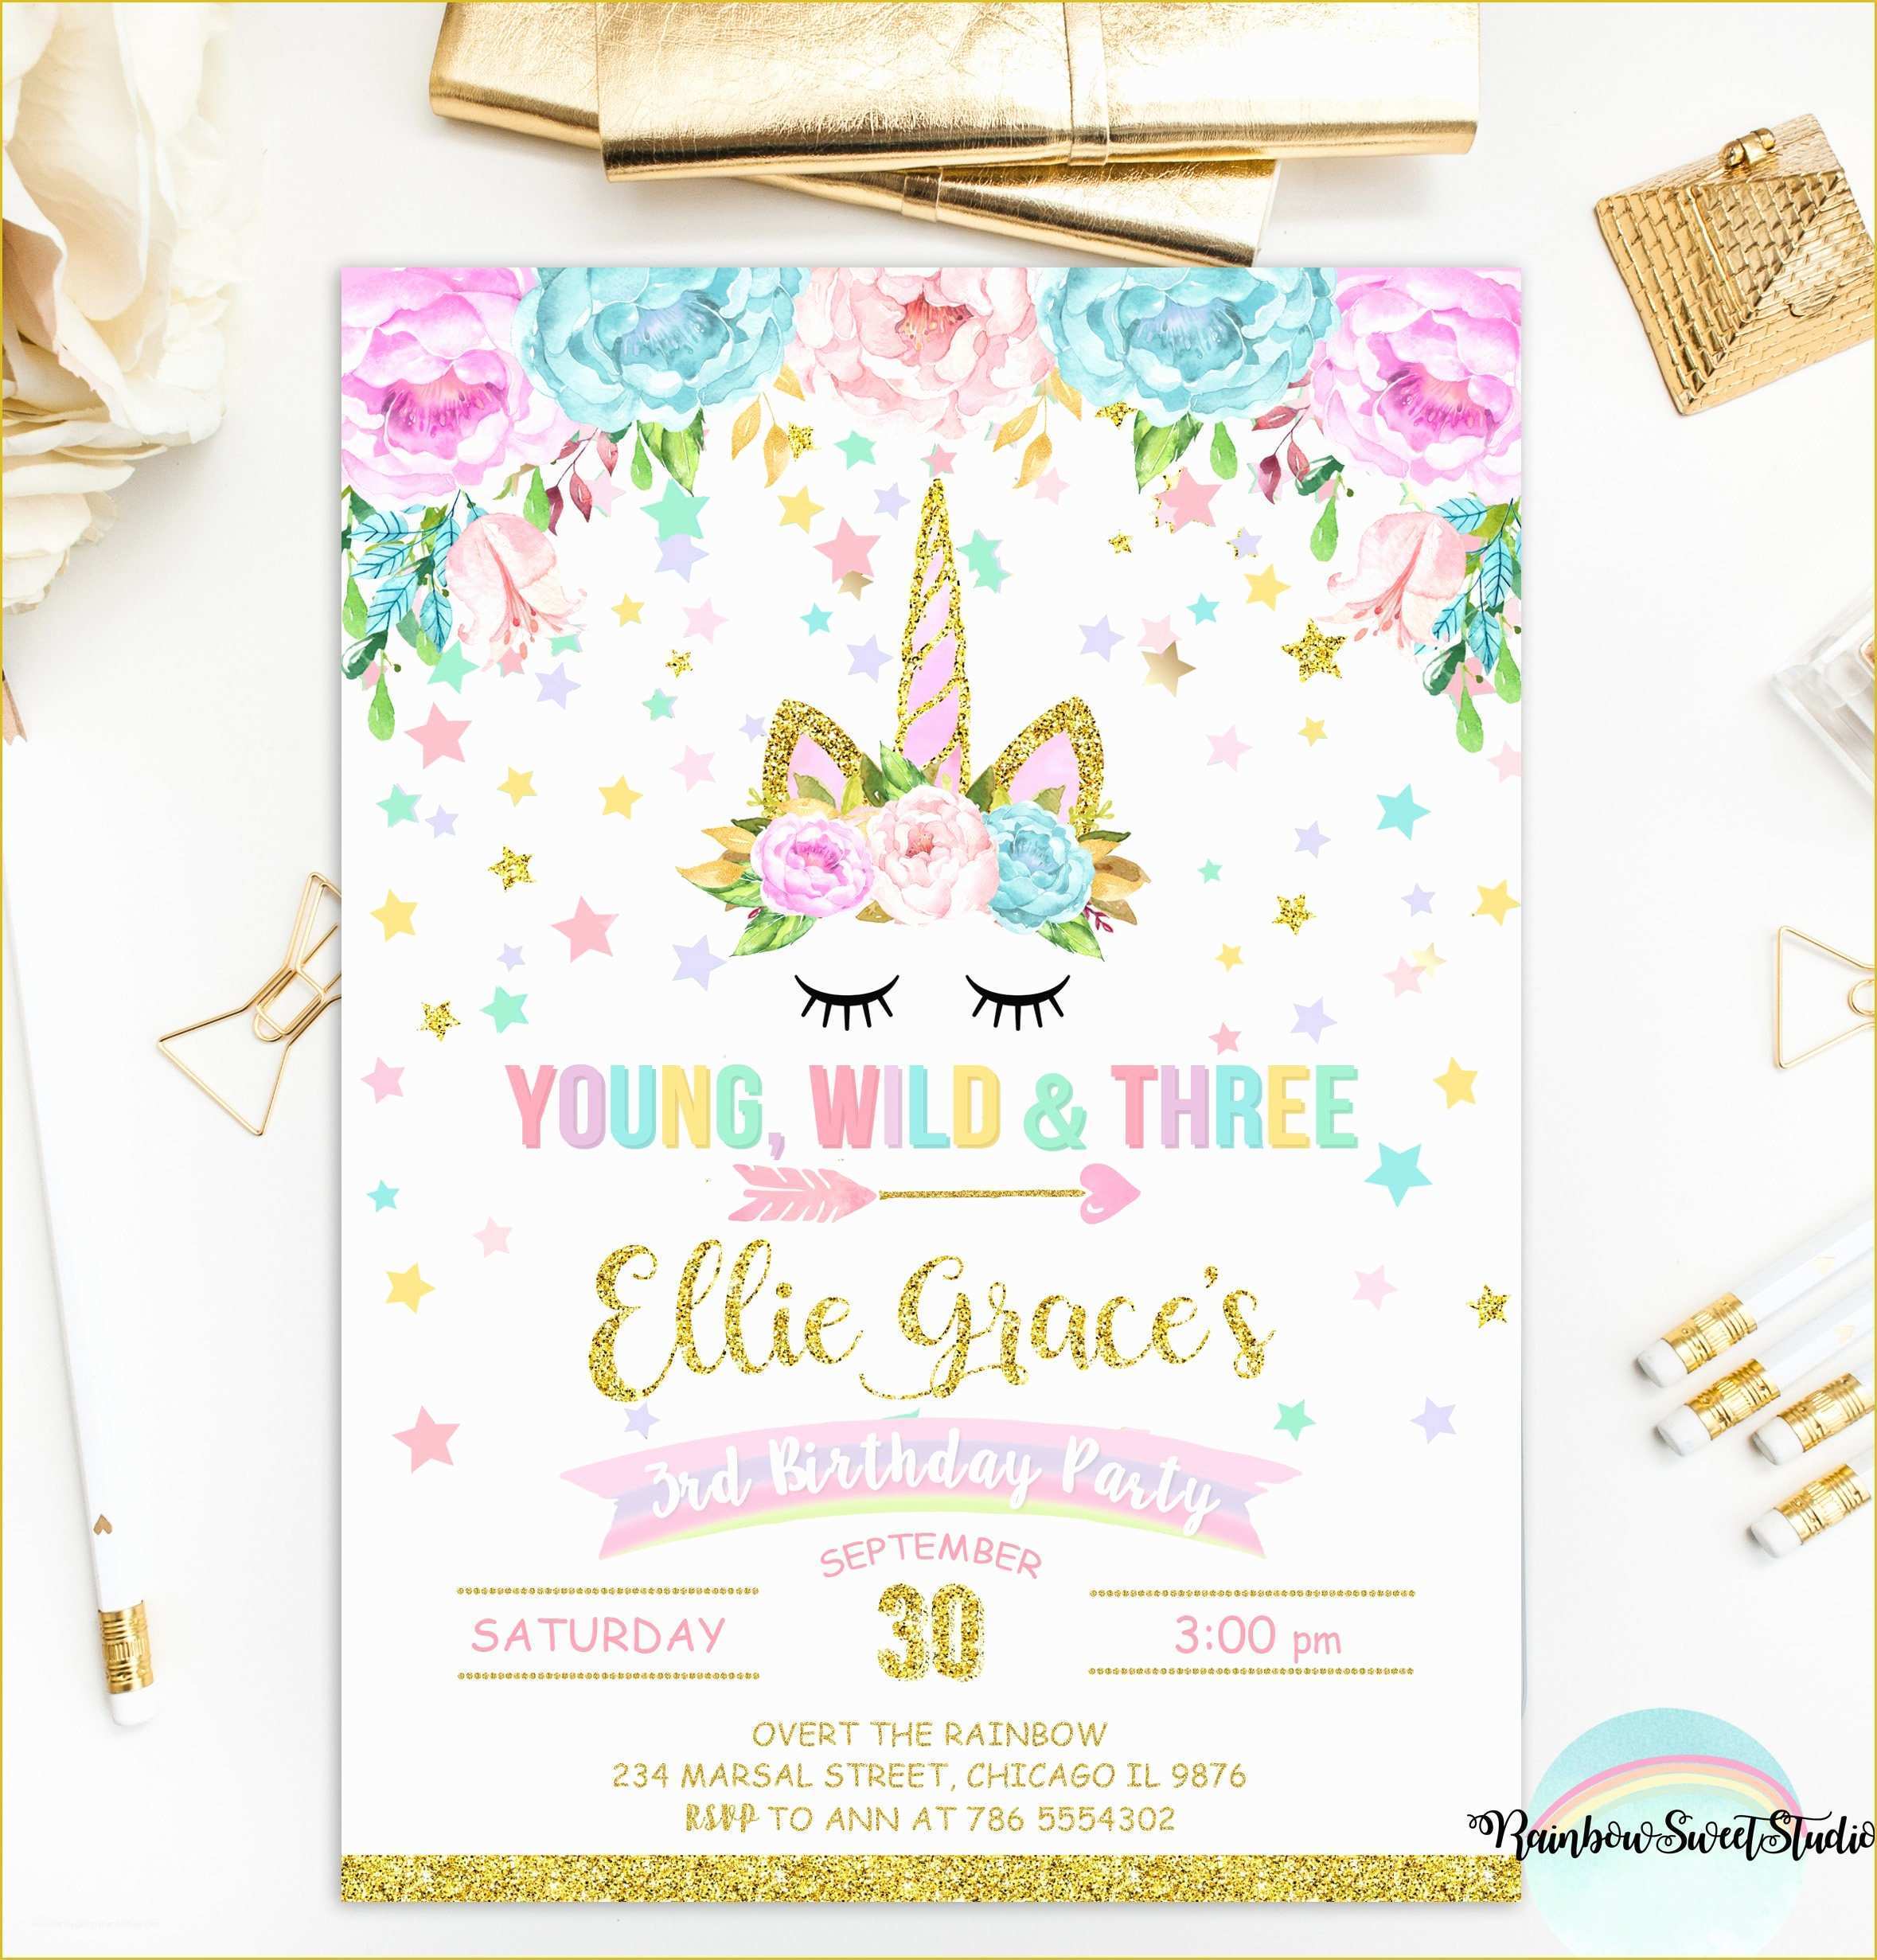 Unicorn Party Invitations Free Template Of Unicorn Young Wild and Three Invitation Unicorn Birthday